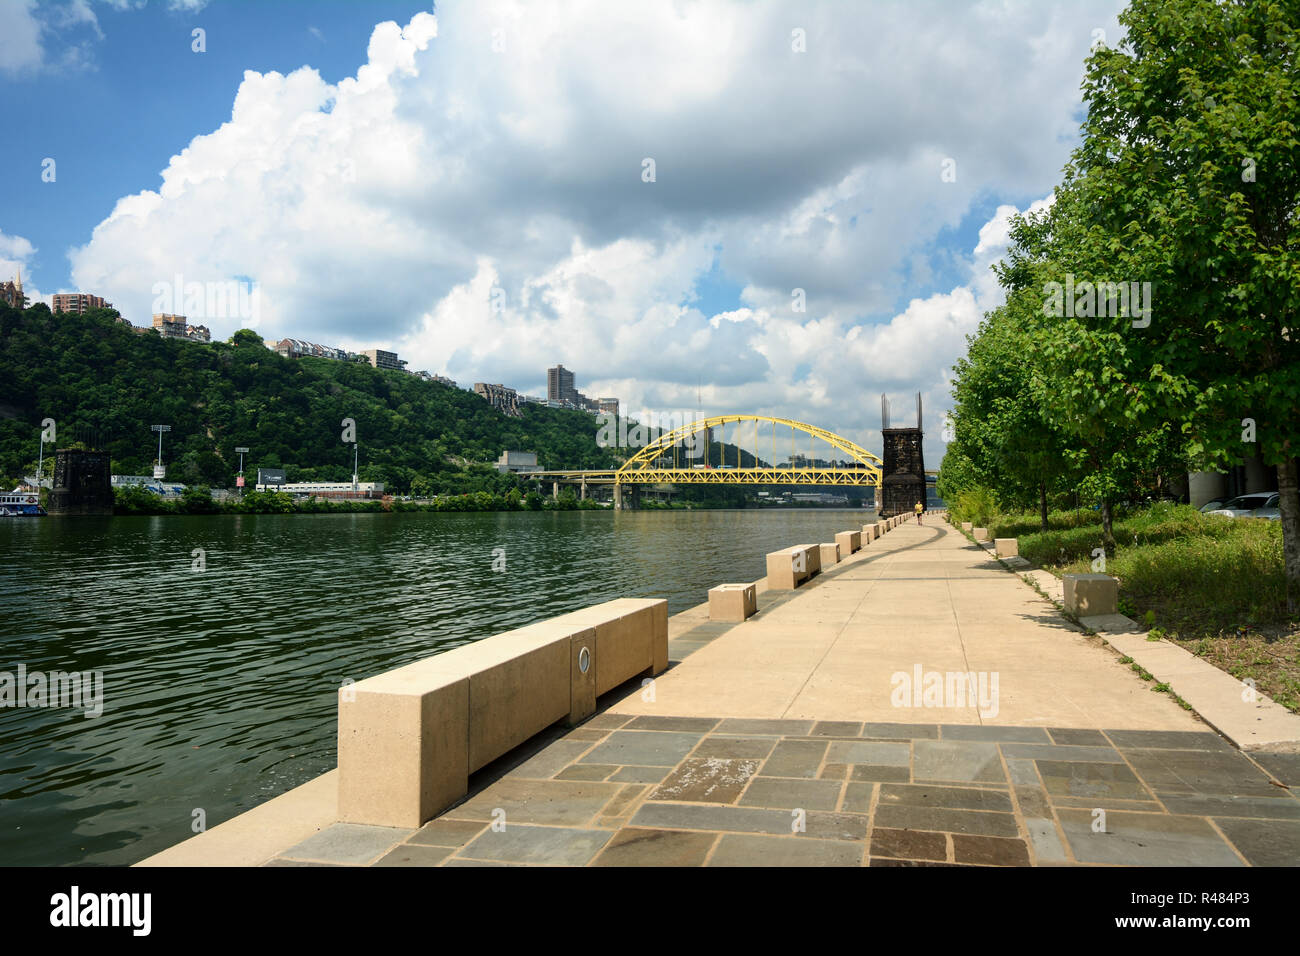 The Three Rivers Heritage Trail is a multi-use riverfront 24-mile nonlinear trail system in the Pittsburgh, Pennsylvania, USA region. Stock Photo